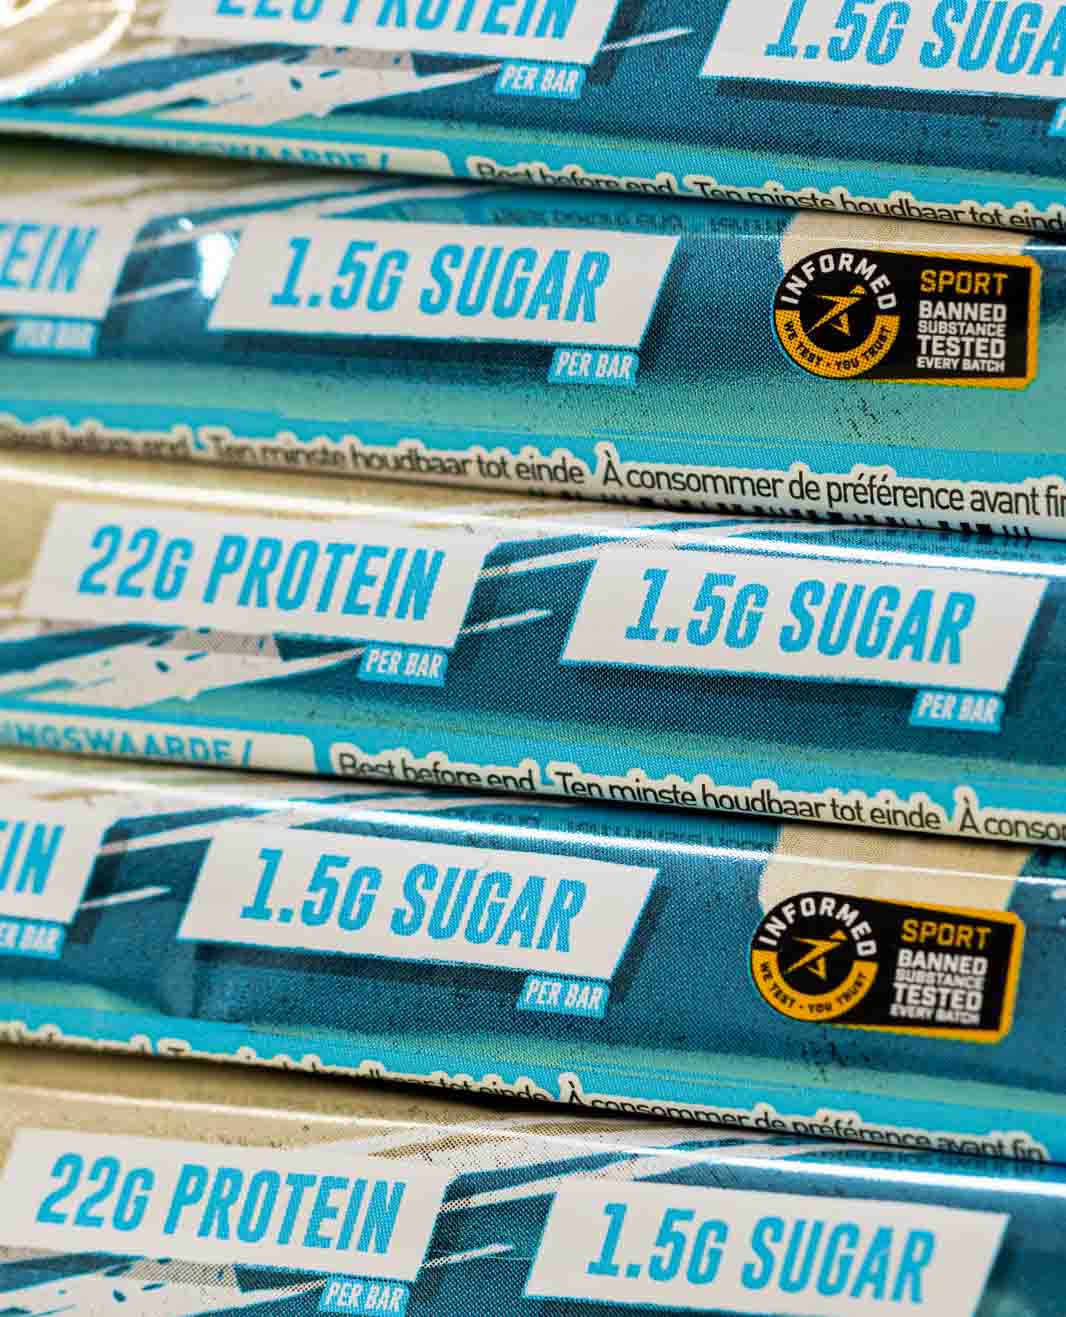 White Chocolate Protein Bar Sugars and Protein 